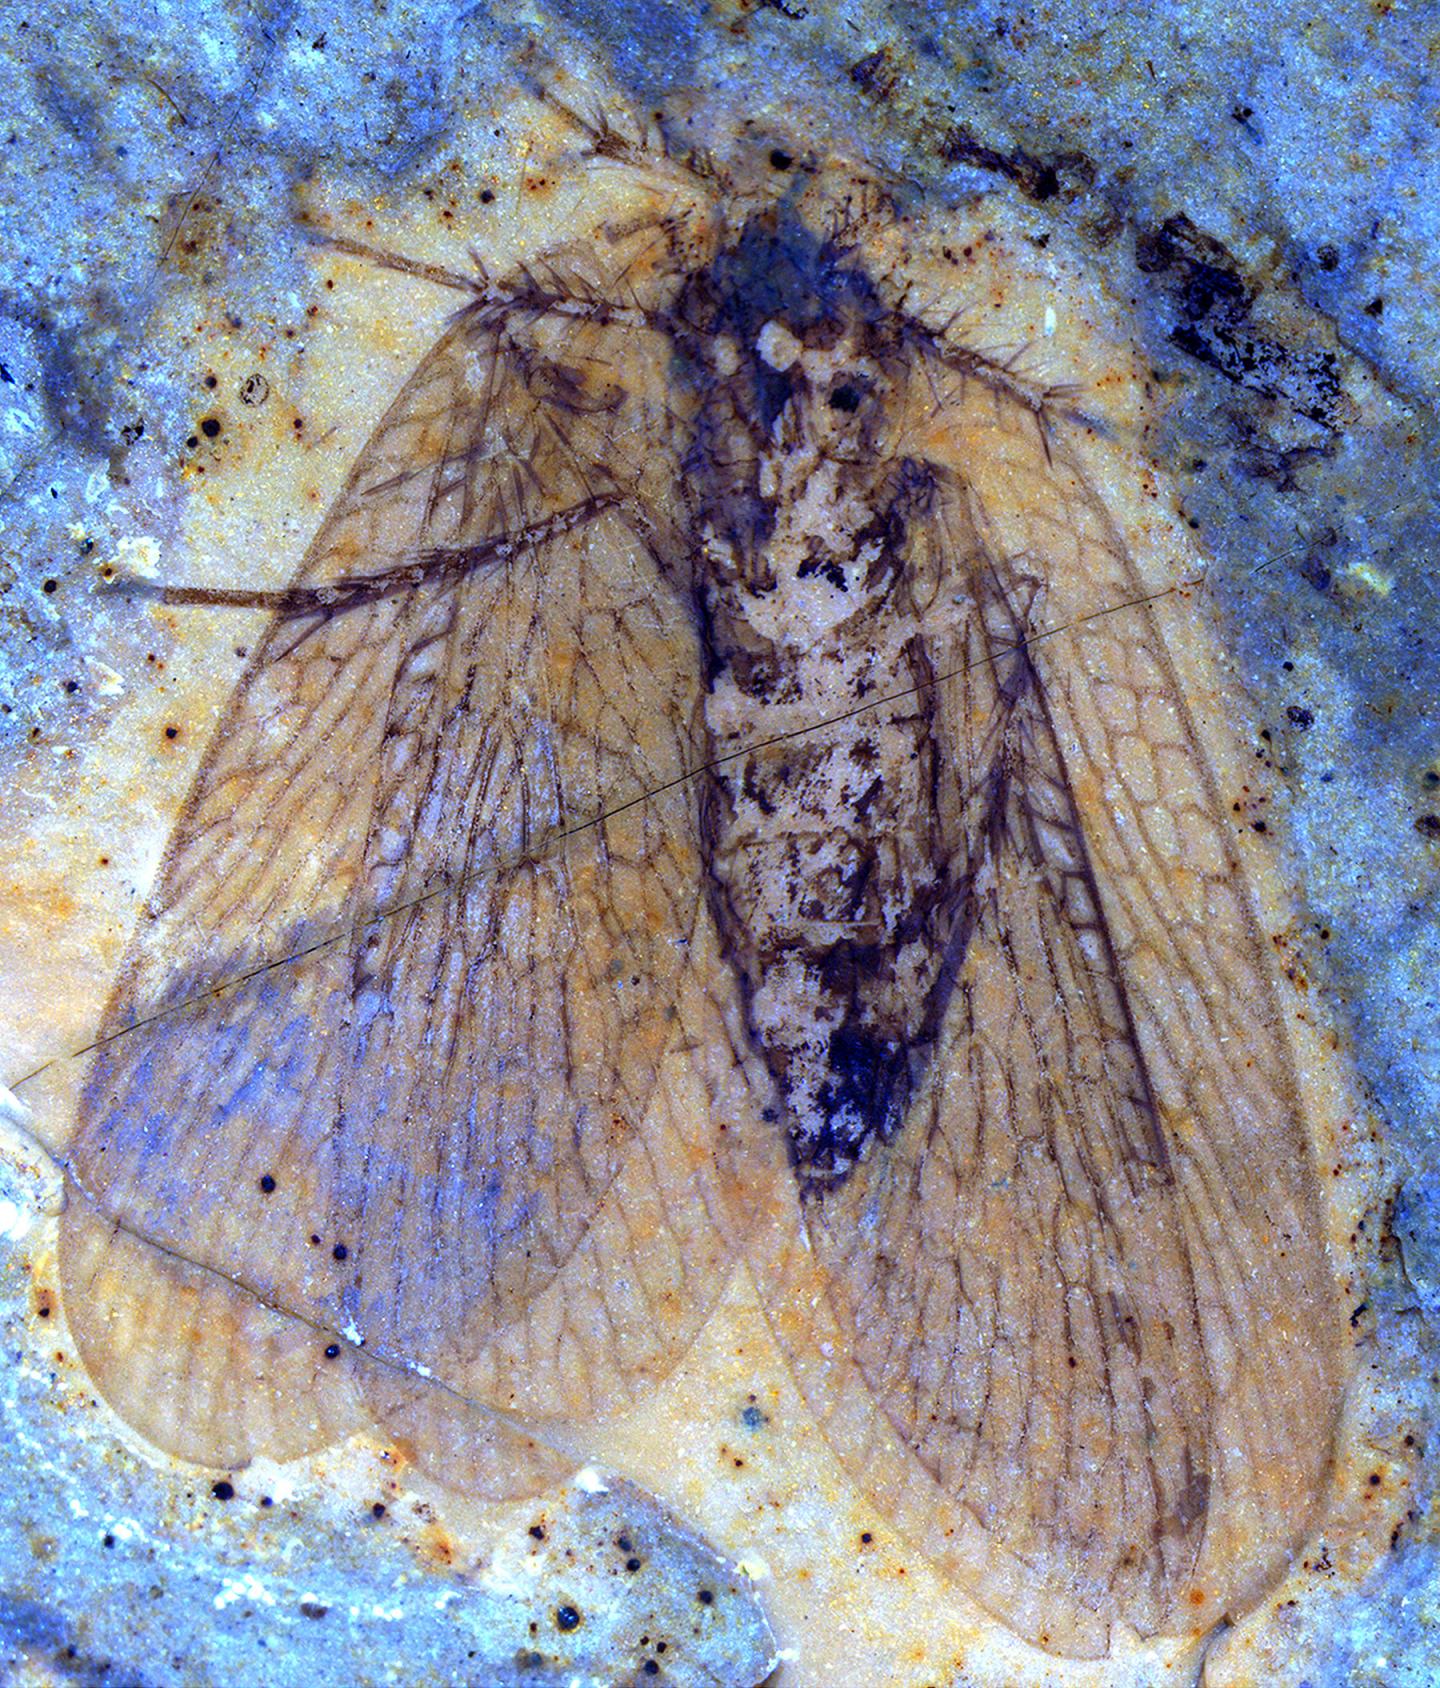 A New Species of Scorpionfly Fossil From 53 Million Years Ago at Mcabee, British Columbia